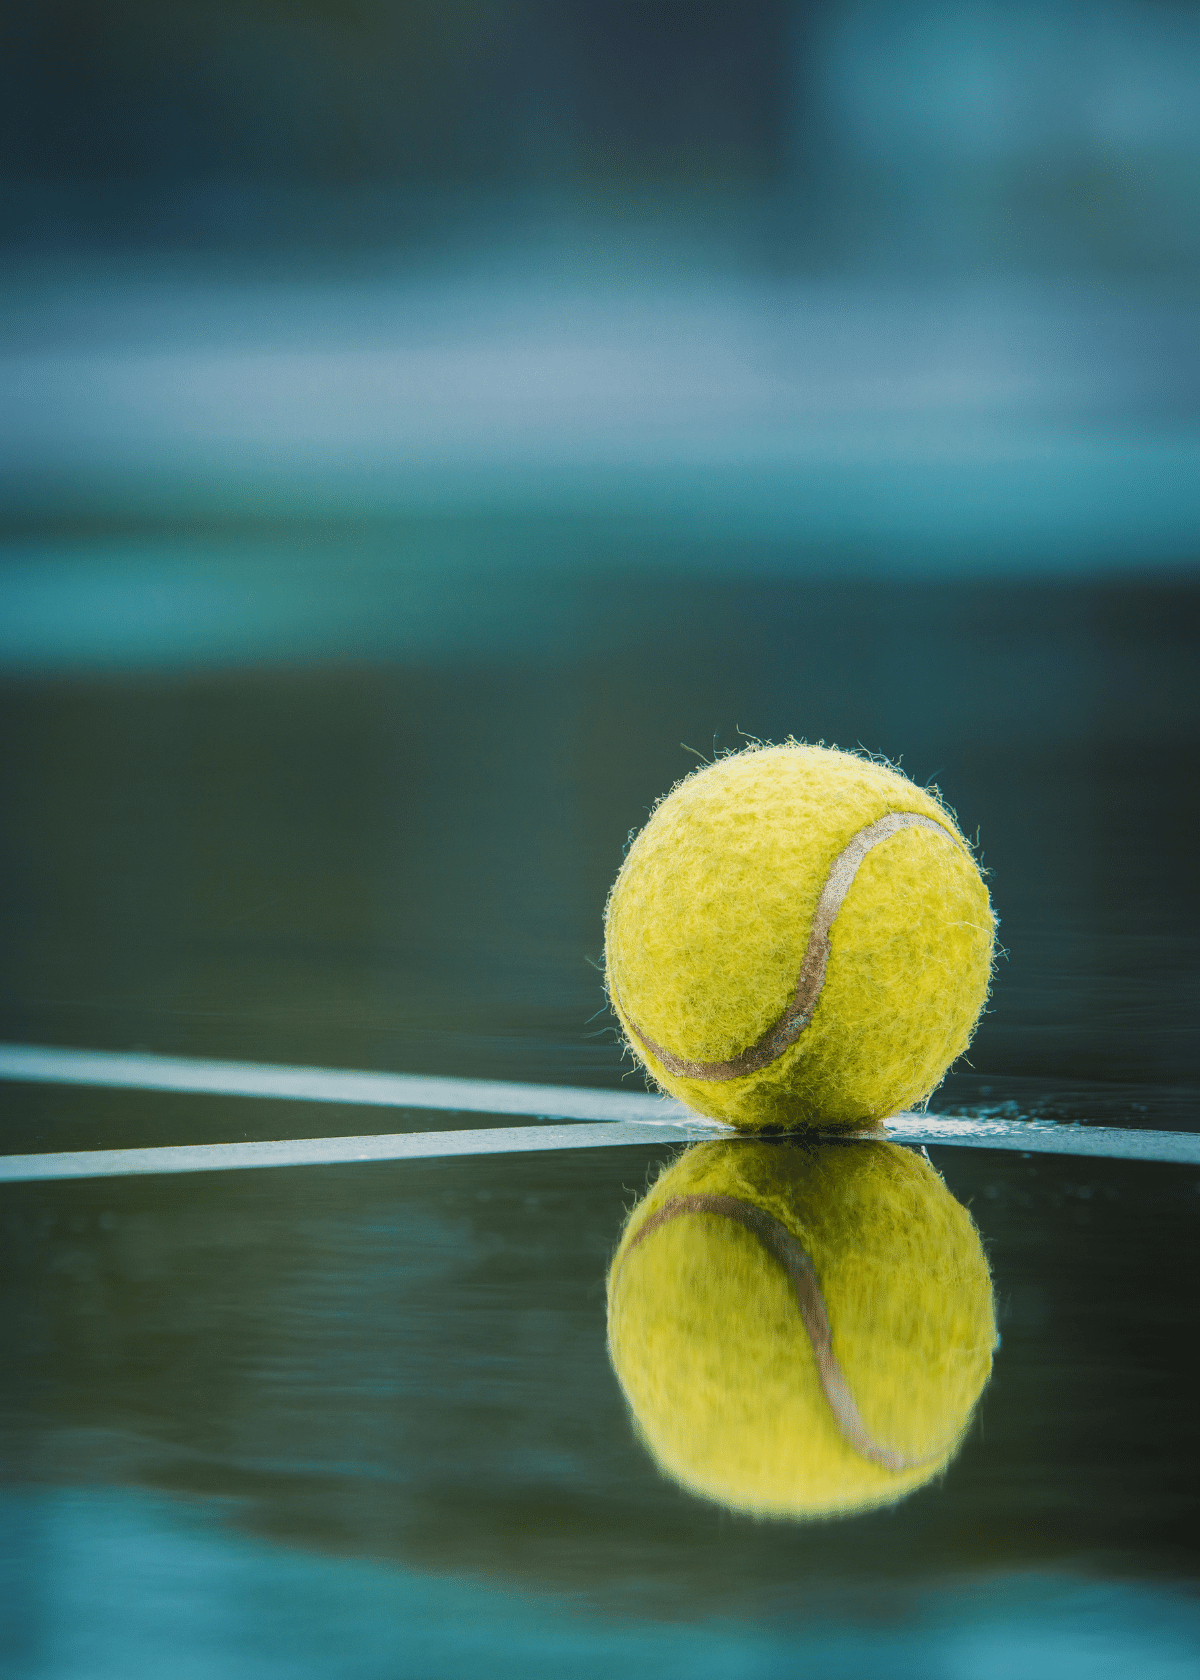 Ace the competition with the Best Tennis Balls for the HardCourts